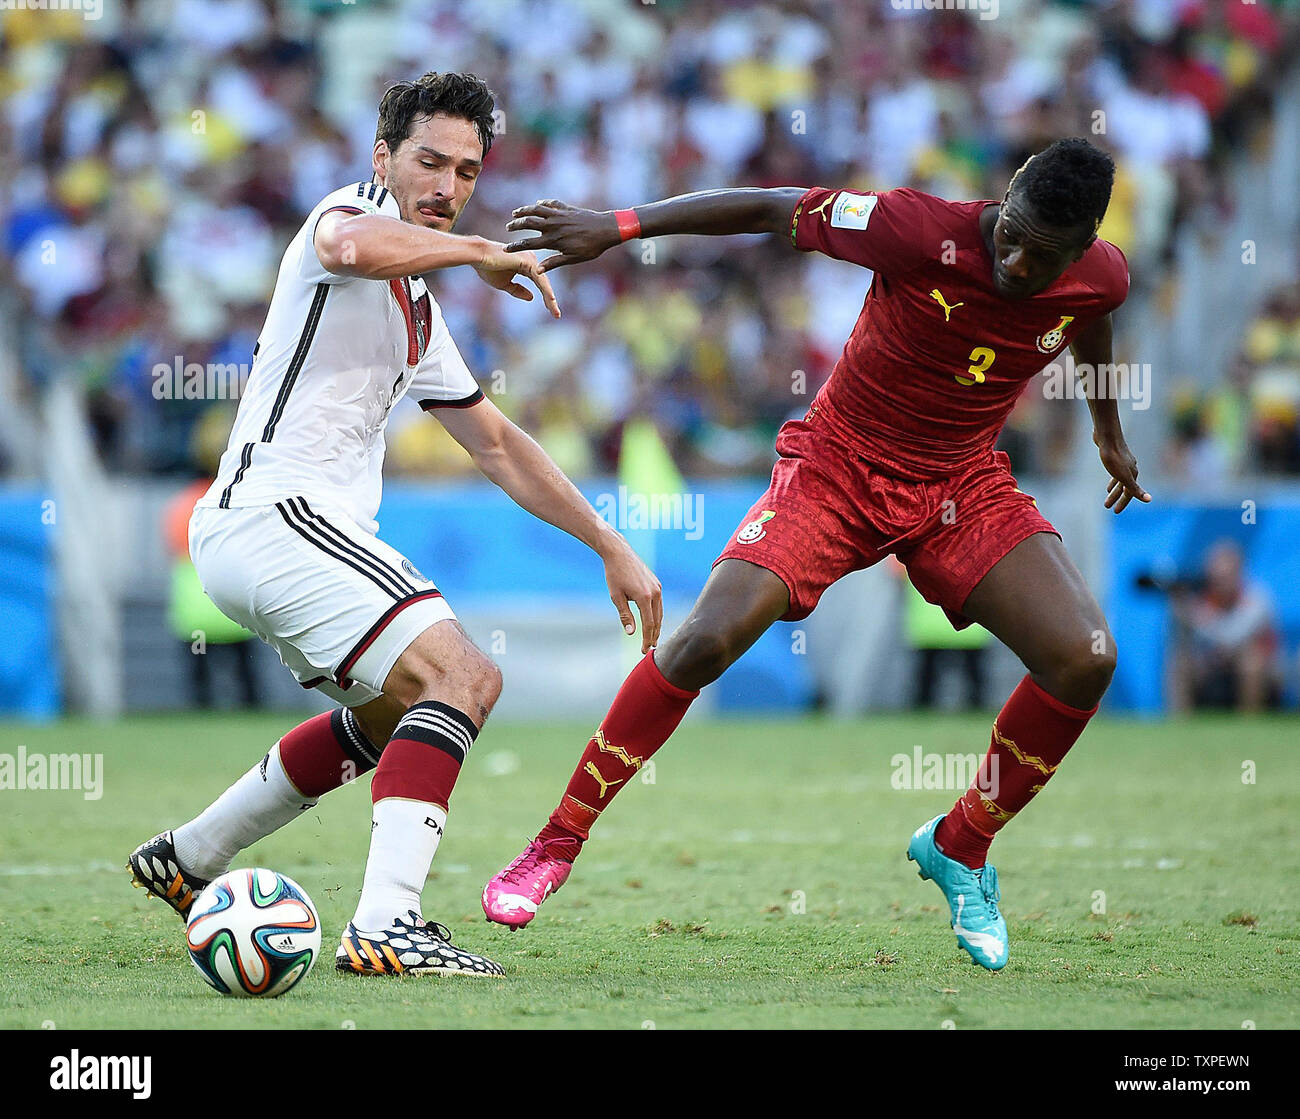 Mats Hummels (L) of Germany competes with Asamoah Gyan of Ghana during the 2014 FIFA World Cup Group G match at the Estadio Castelao in Fortaleza, Brazil on June 21, 2014. UPI/Chris Brunskill Stock Photo